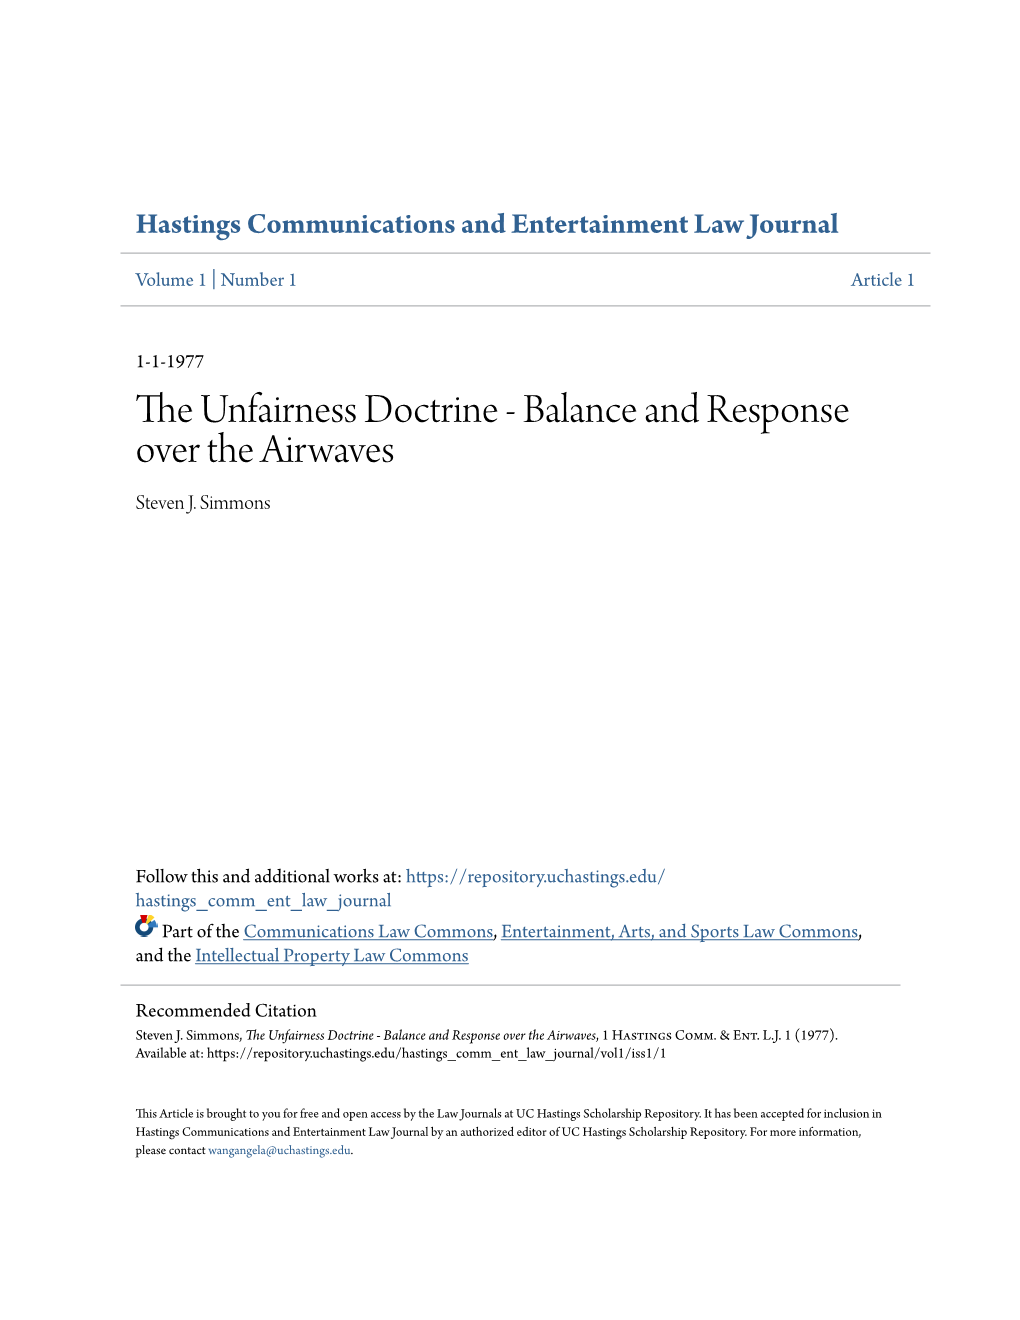 The Unfairness Doctrine - Balance and Response Over the Airwaves, 1 Hastings Comm